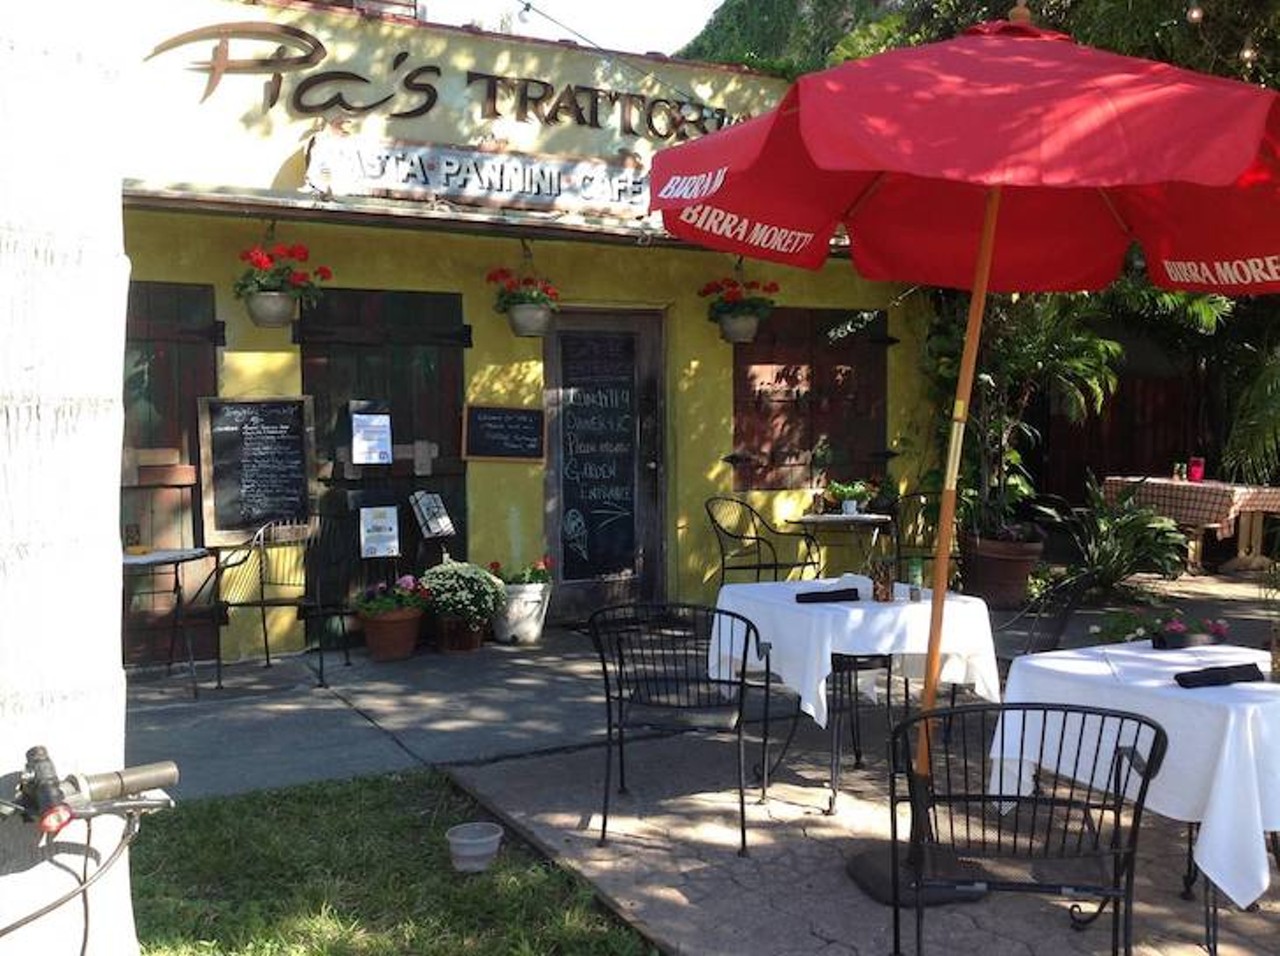 Pia&#146;s Trattoria Gulfport  
3054 Beach Blvd. S., Gulfport, 727-327-2190
Pia&#146;s just wants to spoil you with fresh, natural foods, prepared with lots of love in a romantic, cozy Old Italy atmosphere on an atmospheric bricked patio. 
Photo via Pia&#146;s Trattoria Gulfport/Facebook